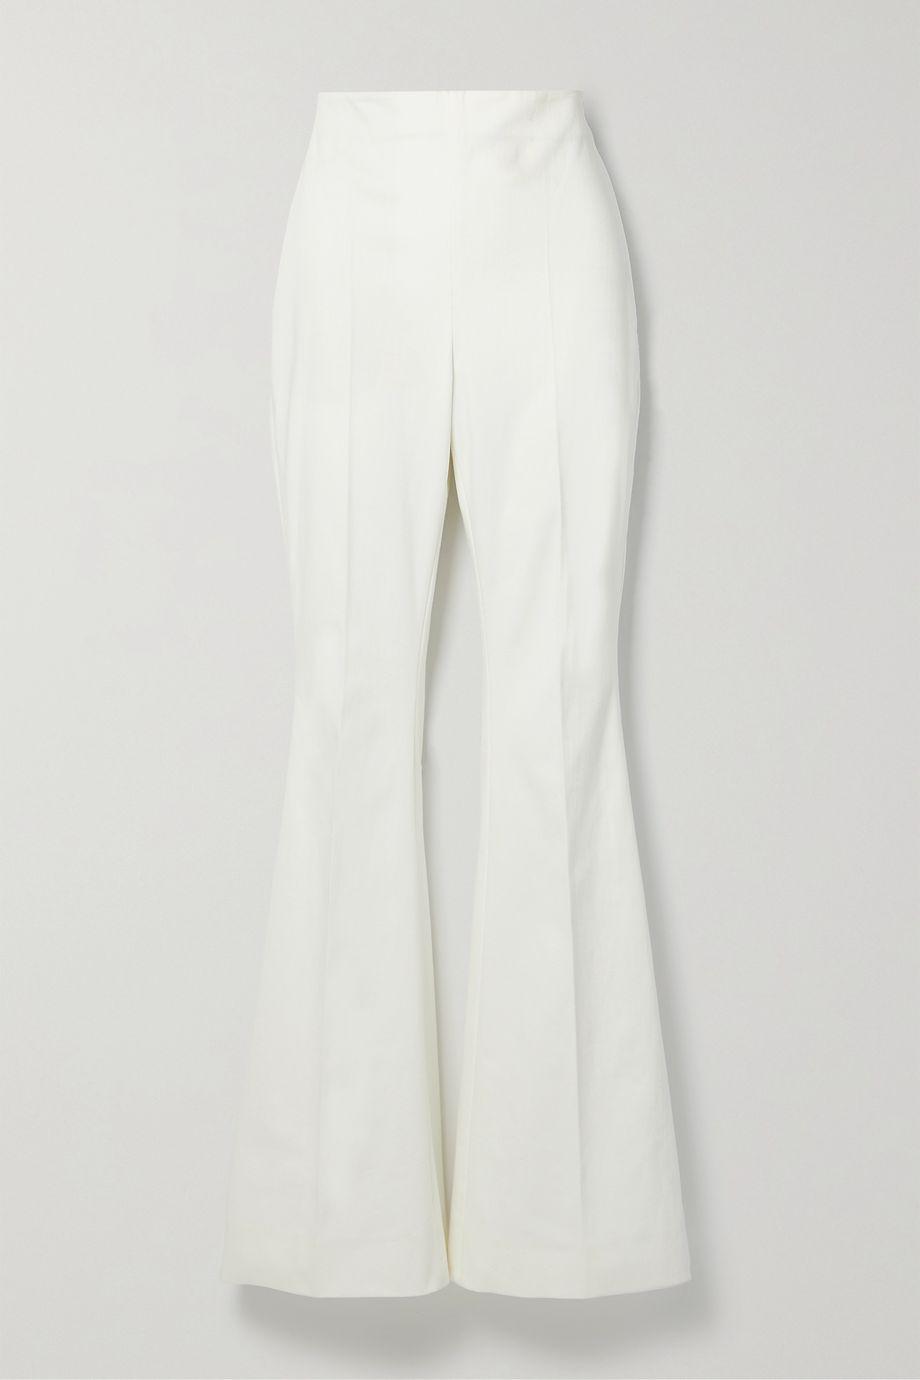 Cotton-blend twill flared pants by AKRIS